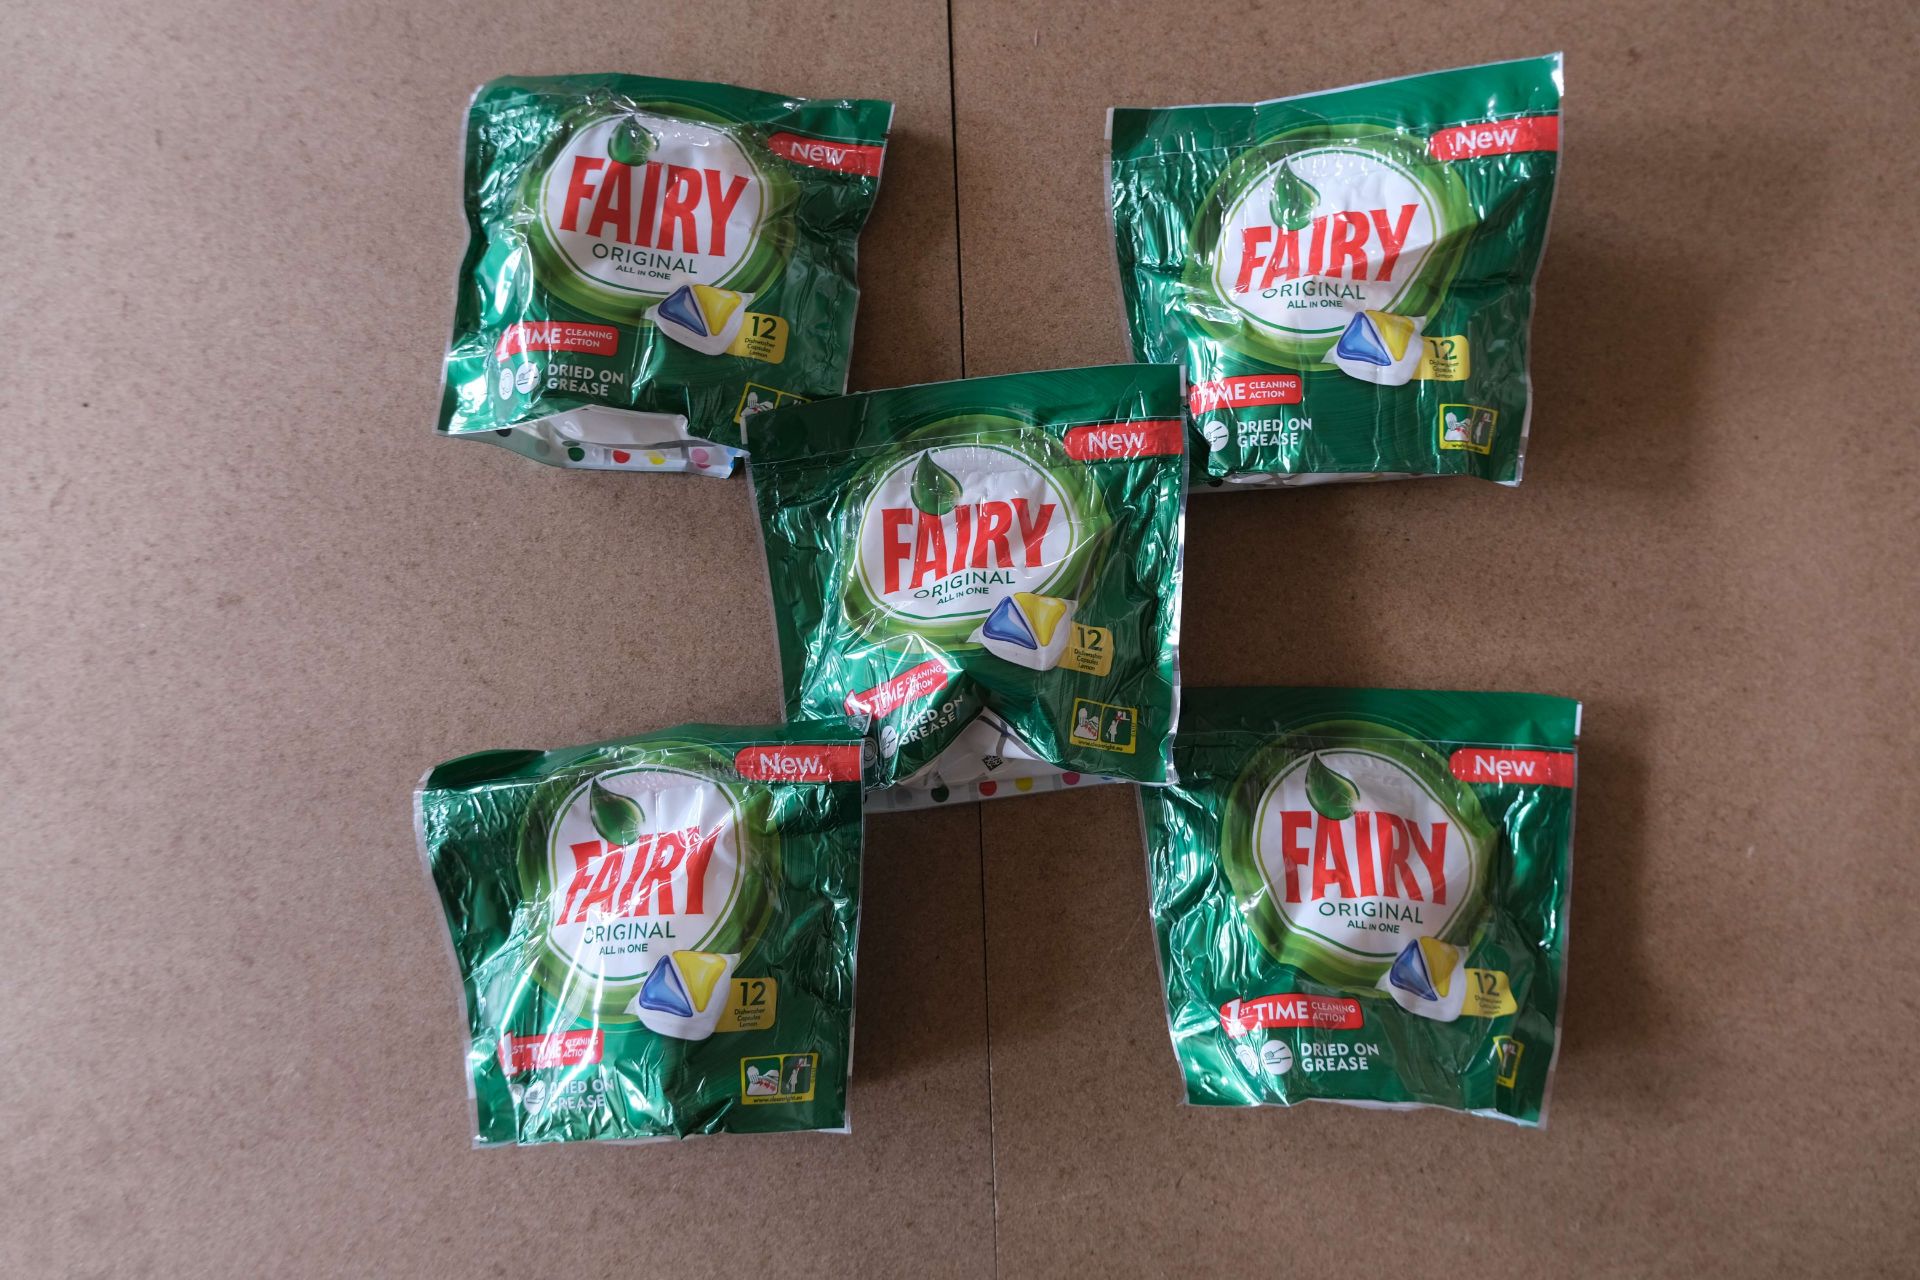 5x Fairy Original All in One Dishwasher Tablets 12 Pack